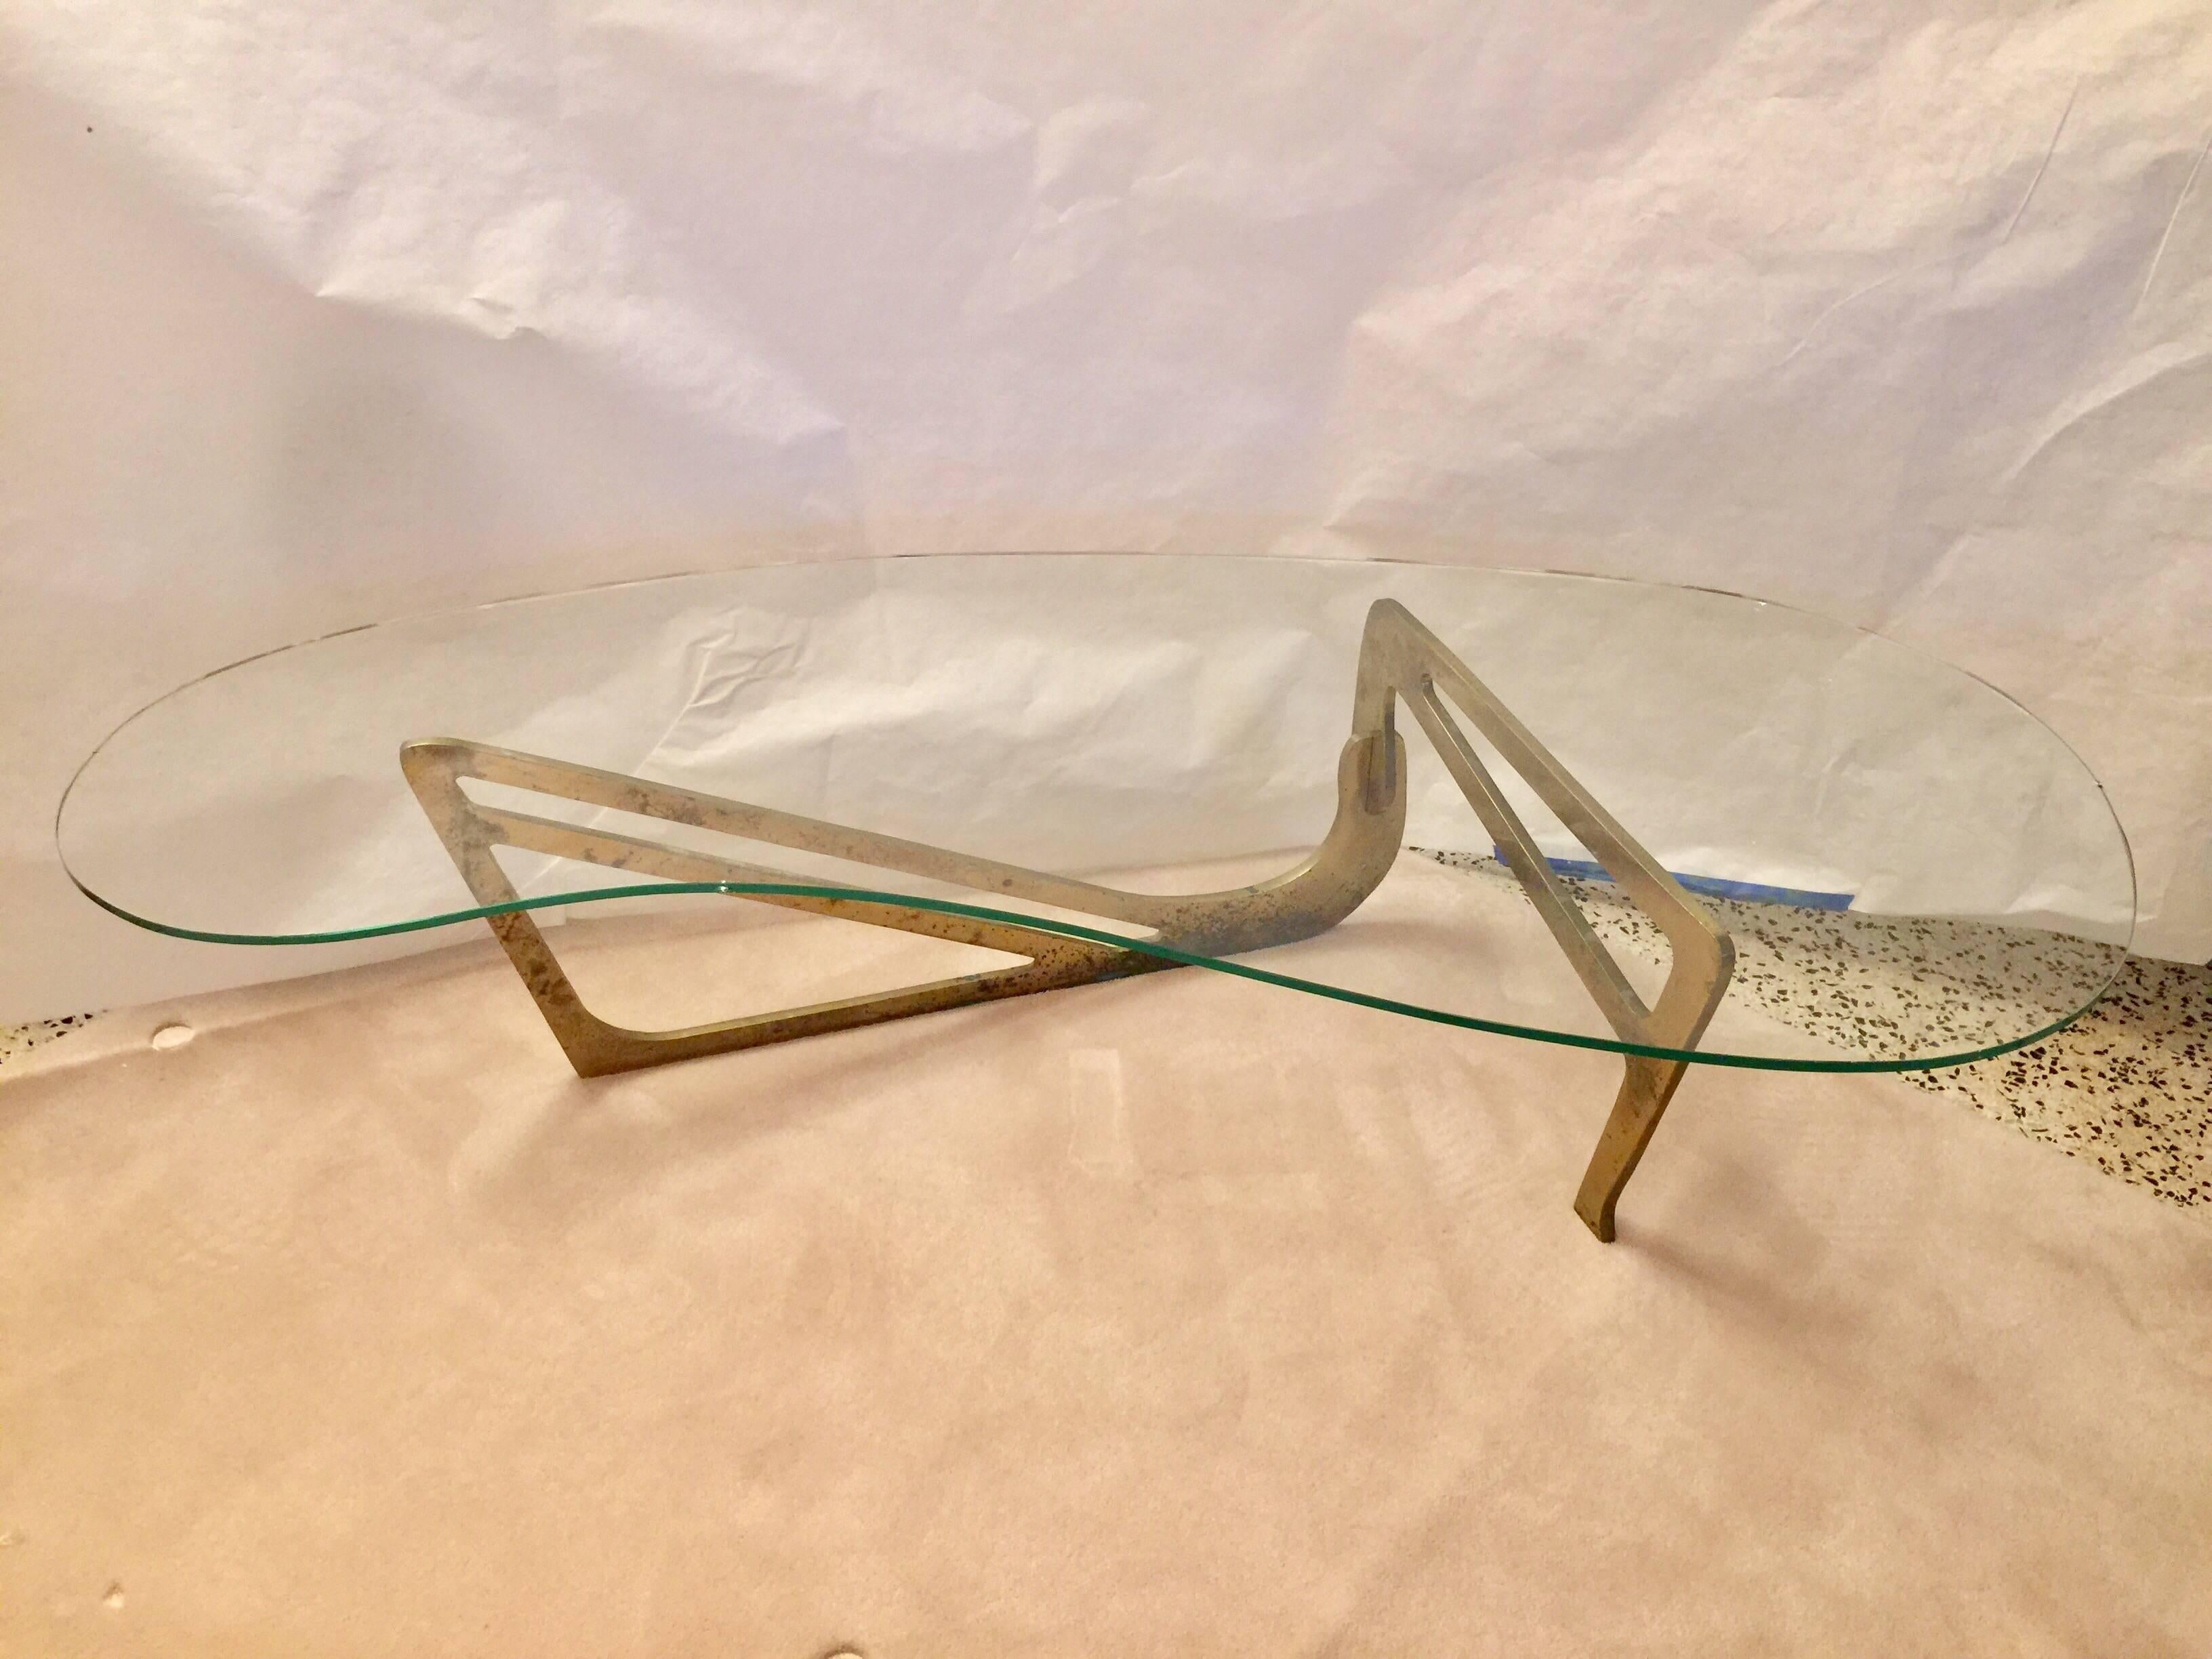 Rare stencil cut design in solid brass, very sculptural with original biomorphic glass top and the base is comprised of two parts interconnected. This is all original, glass has some chips and the base has patina/pitting that can be polished to